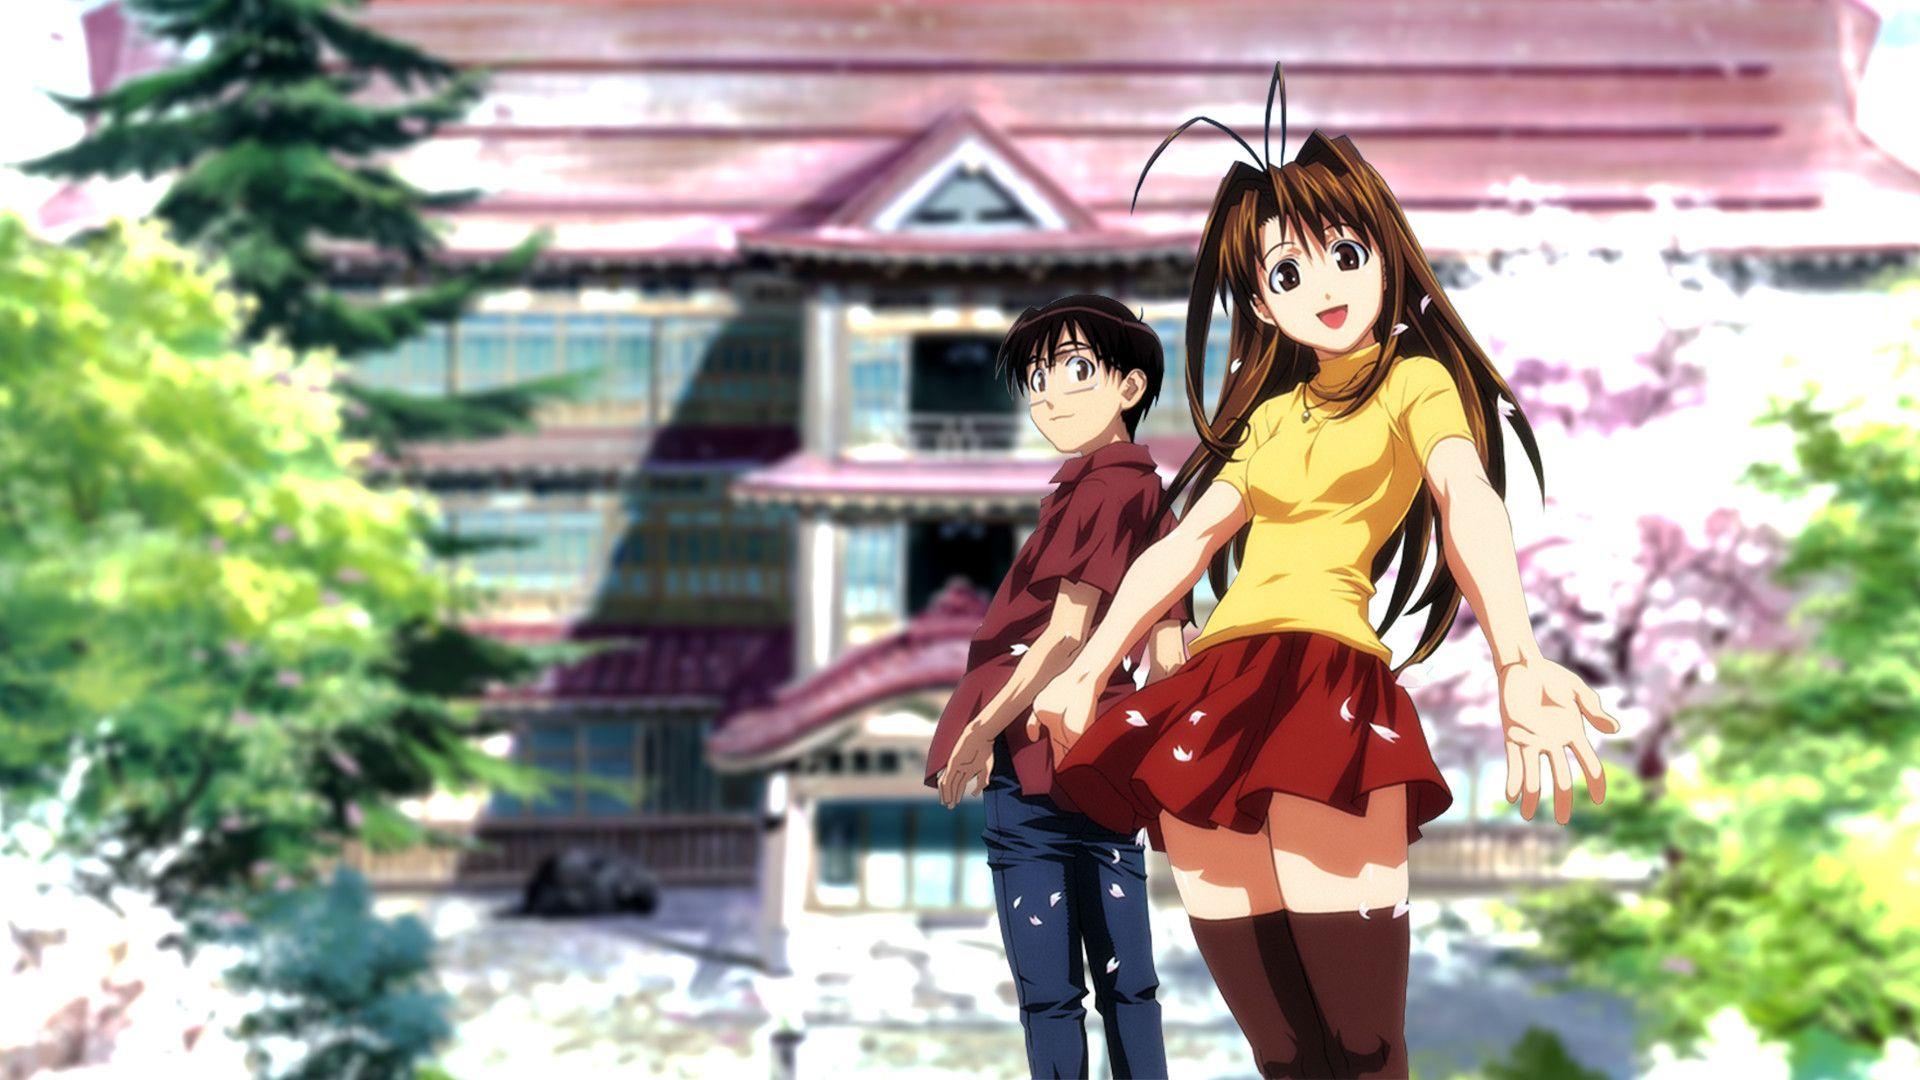 Love Hina Wallpapers - Top Free Love Hina Backgrounds ...